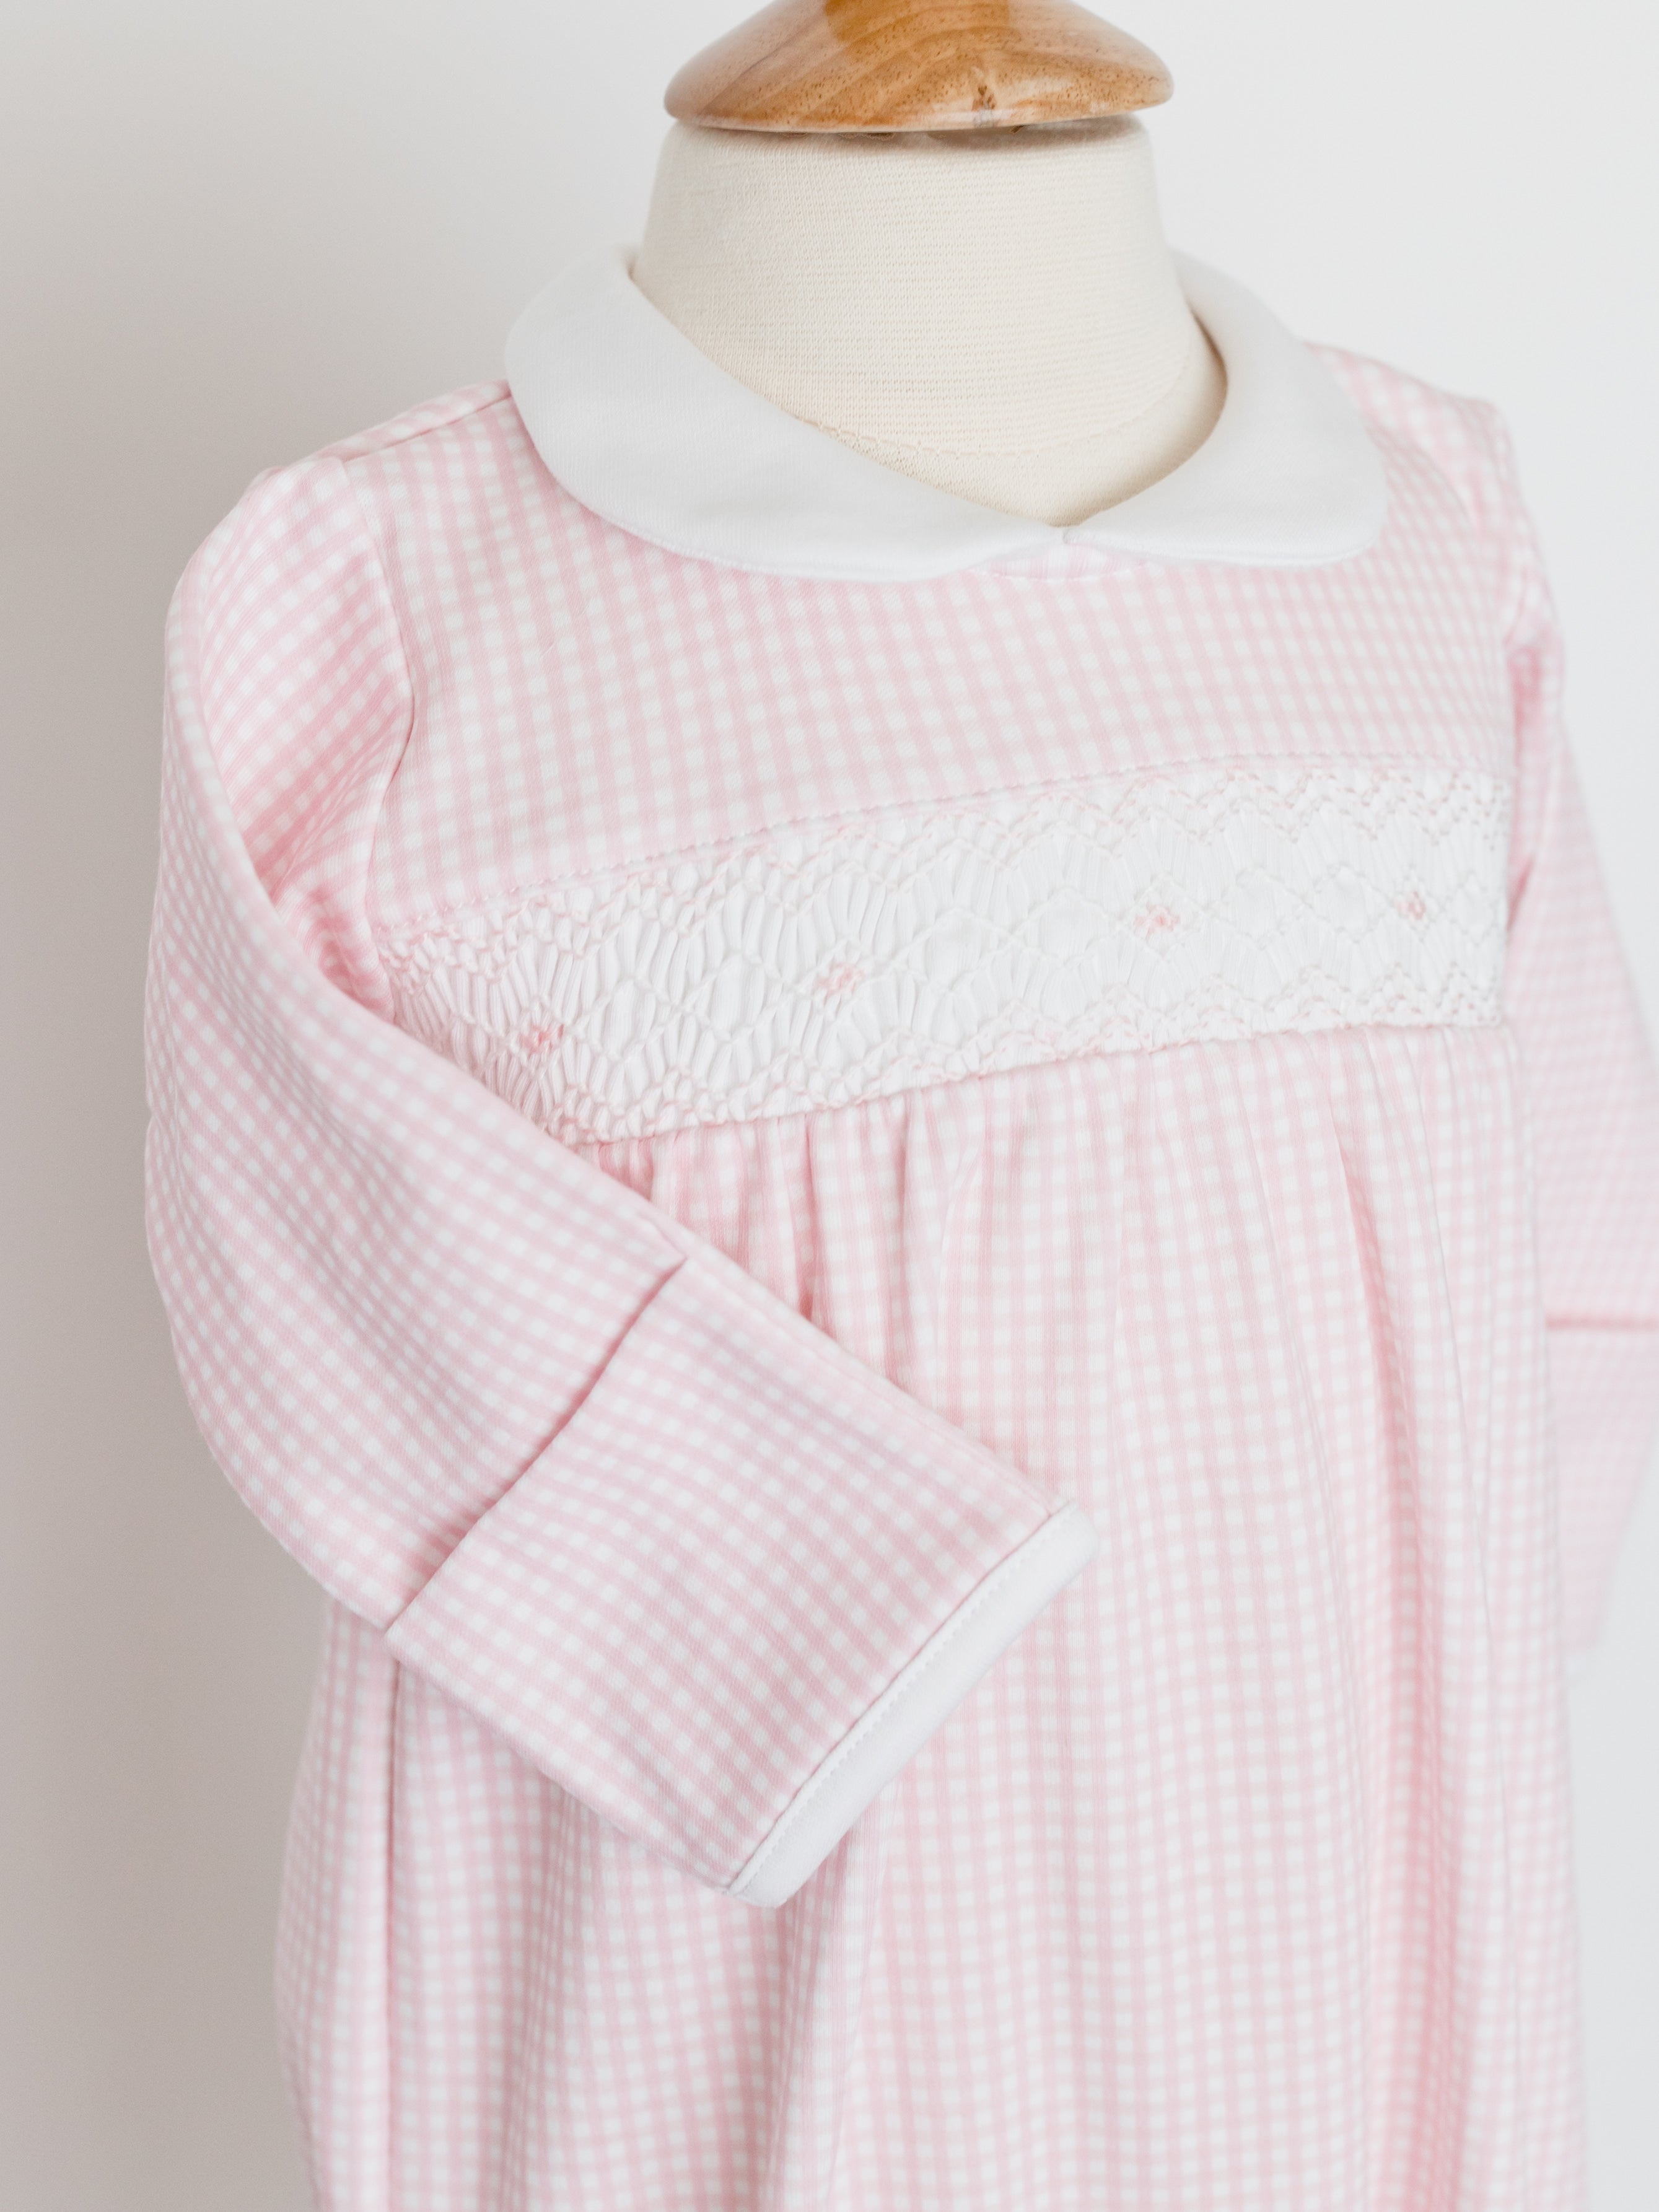 Nella Pima Pink Gingham Baby Gown